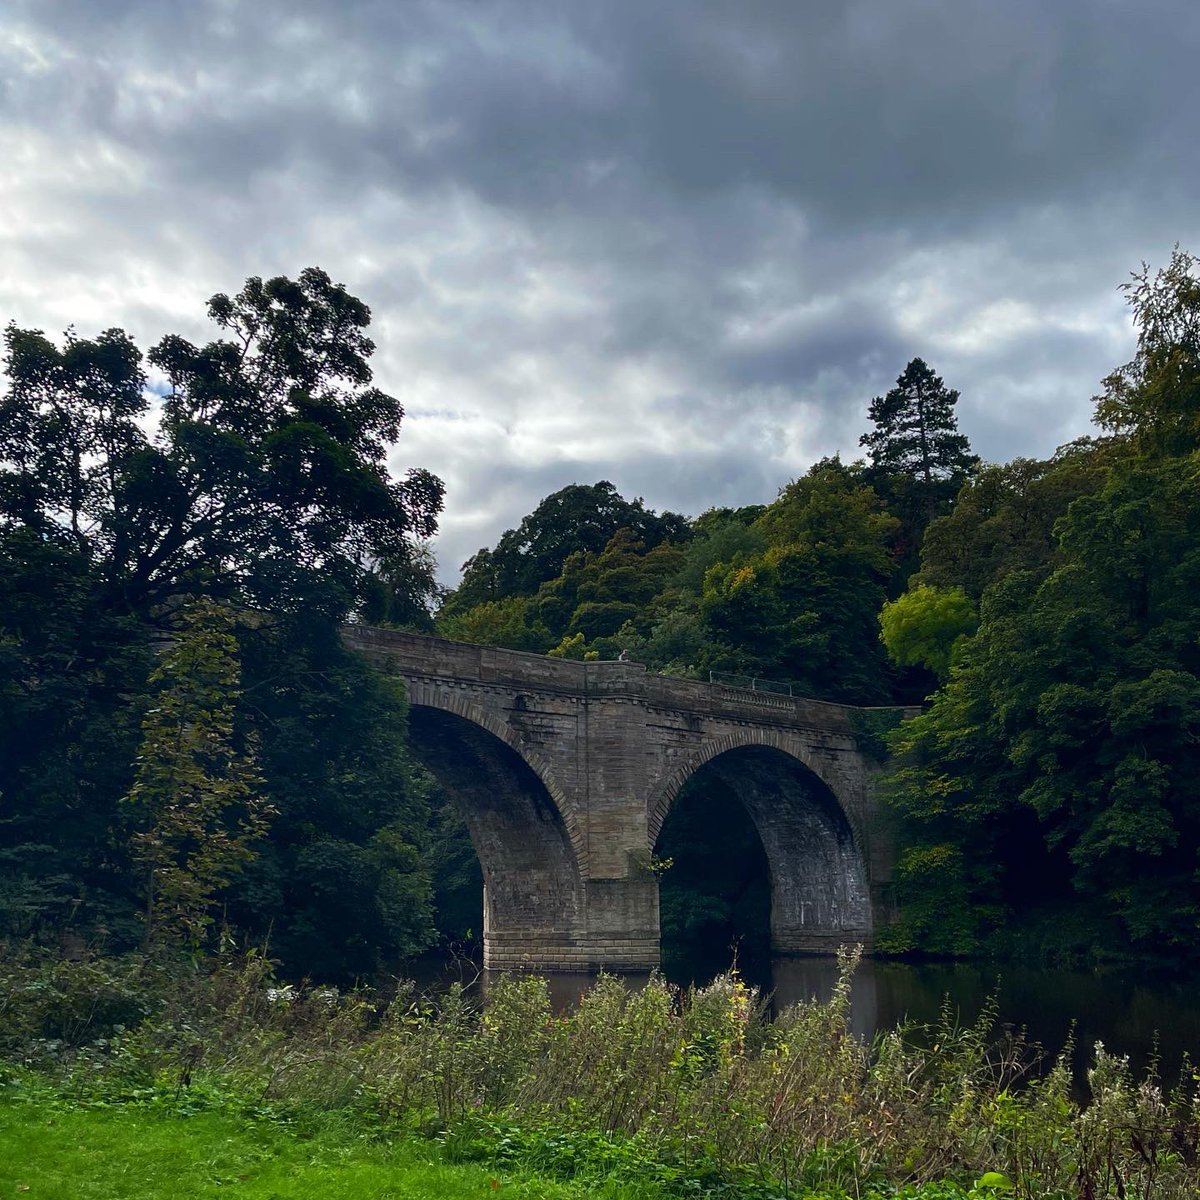 Just back from a rare non-music-related #roadtrip, making the 1000-mile round trip to deliver our eldest to #UniversityofDurham for start of his 2nd year there. Thanks to a hotel stop en route, we arrived in time to fit in a very pleasant #walk along the #RiverWear, ->